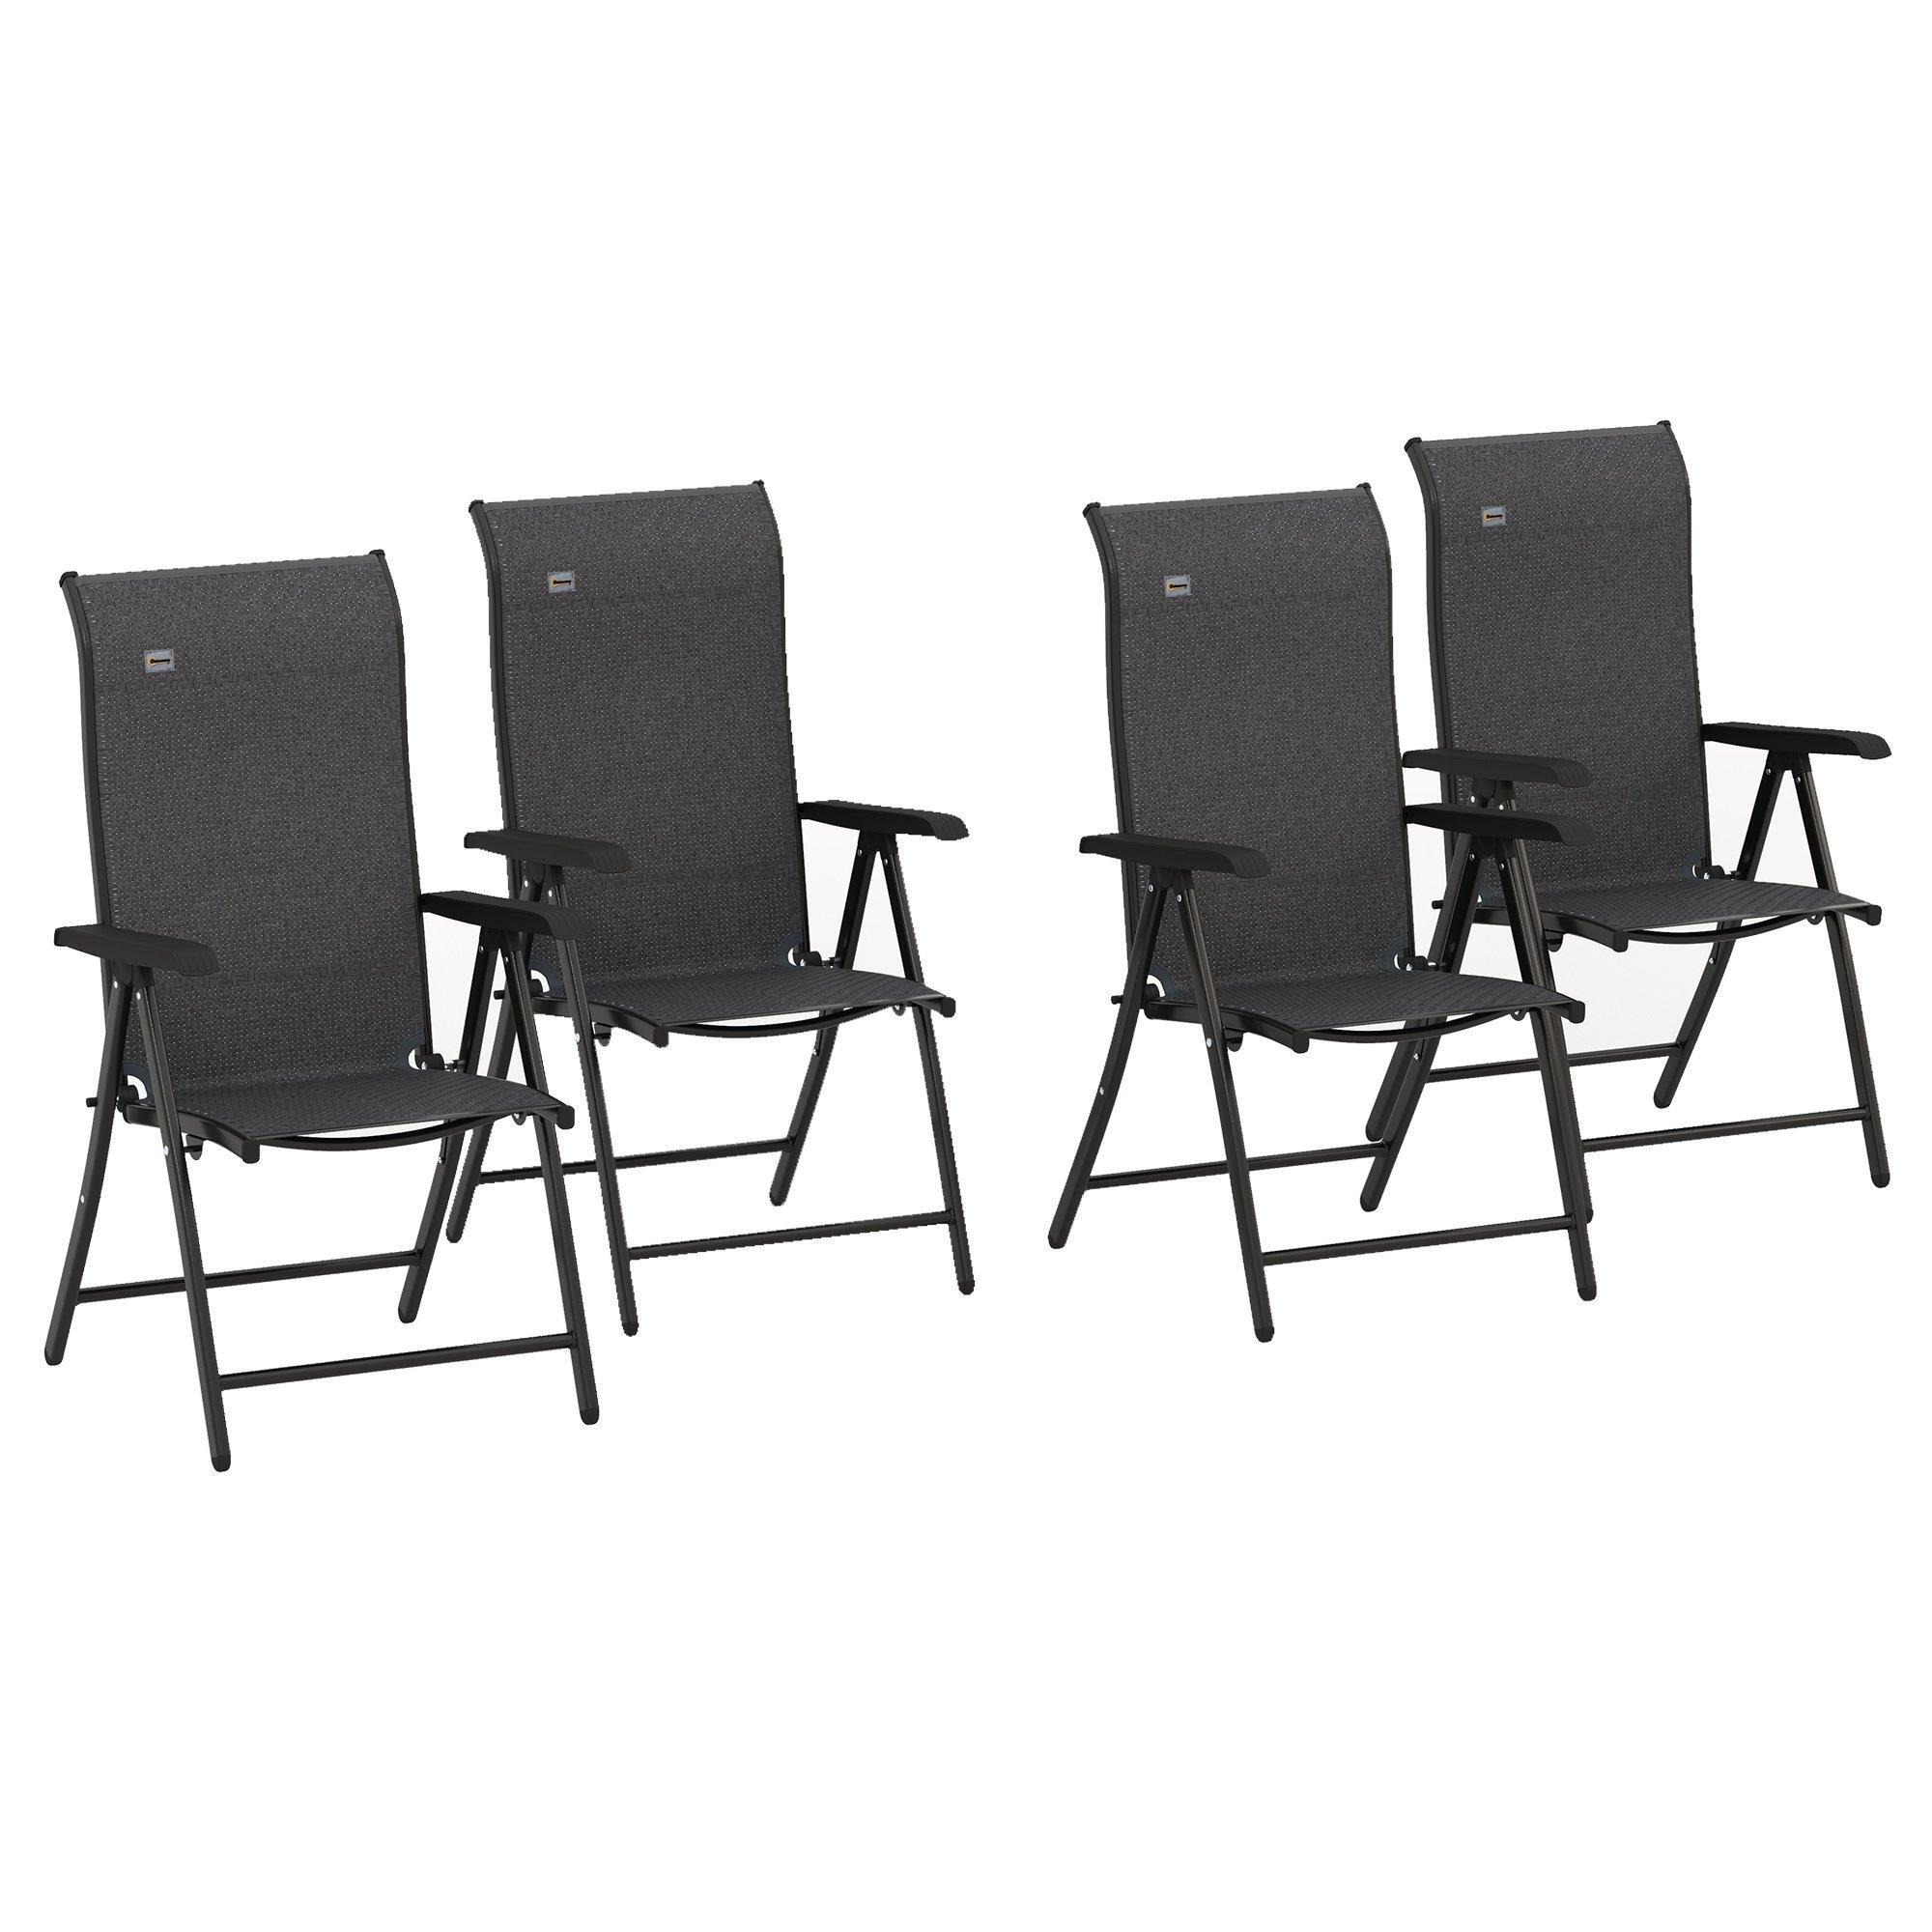 4 PCs Outdoor Rattan Folding Chair Set with 7 Levels Adjustable Backrest Grey - image 1